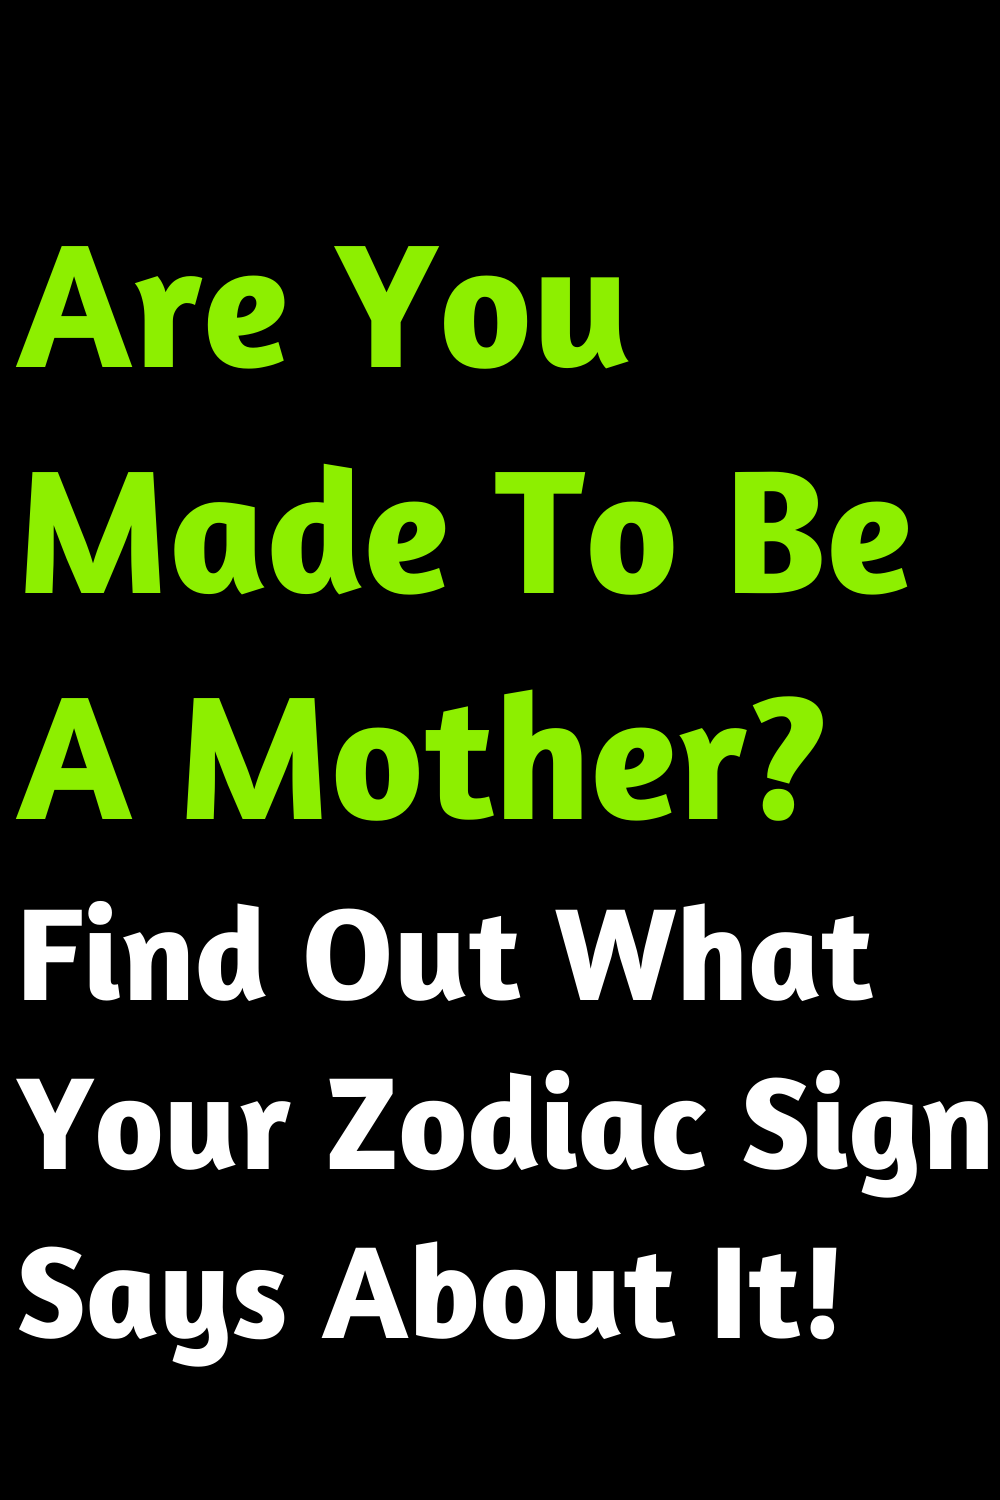 Are You Made To Be A Mother? Find Out What Your Zodiac Sign Says About It!